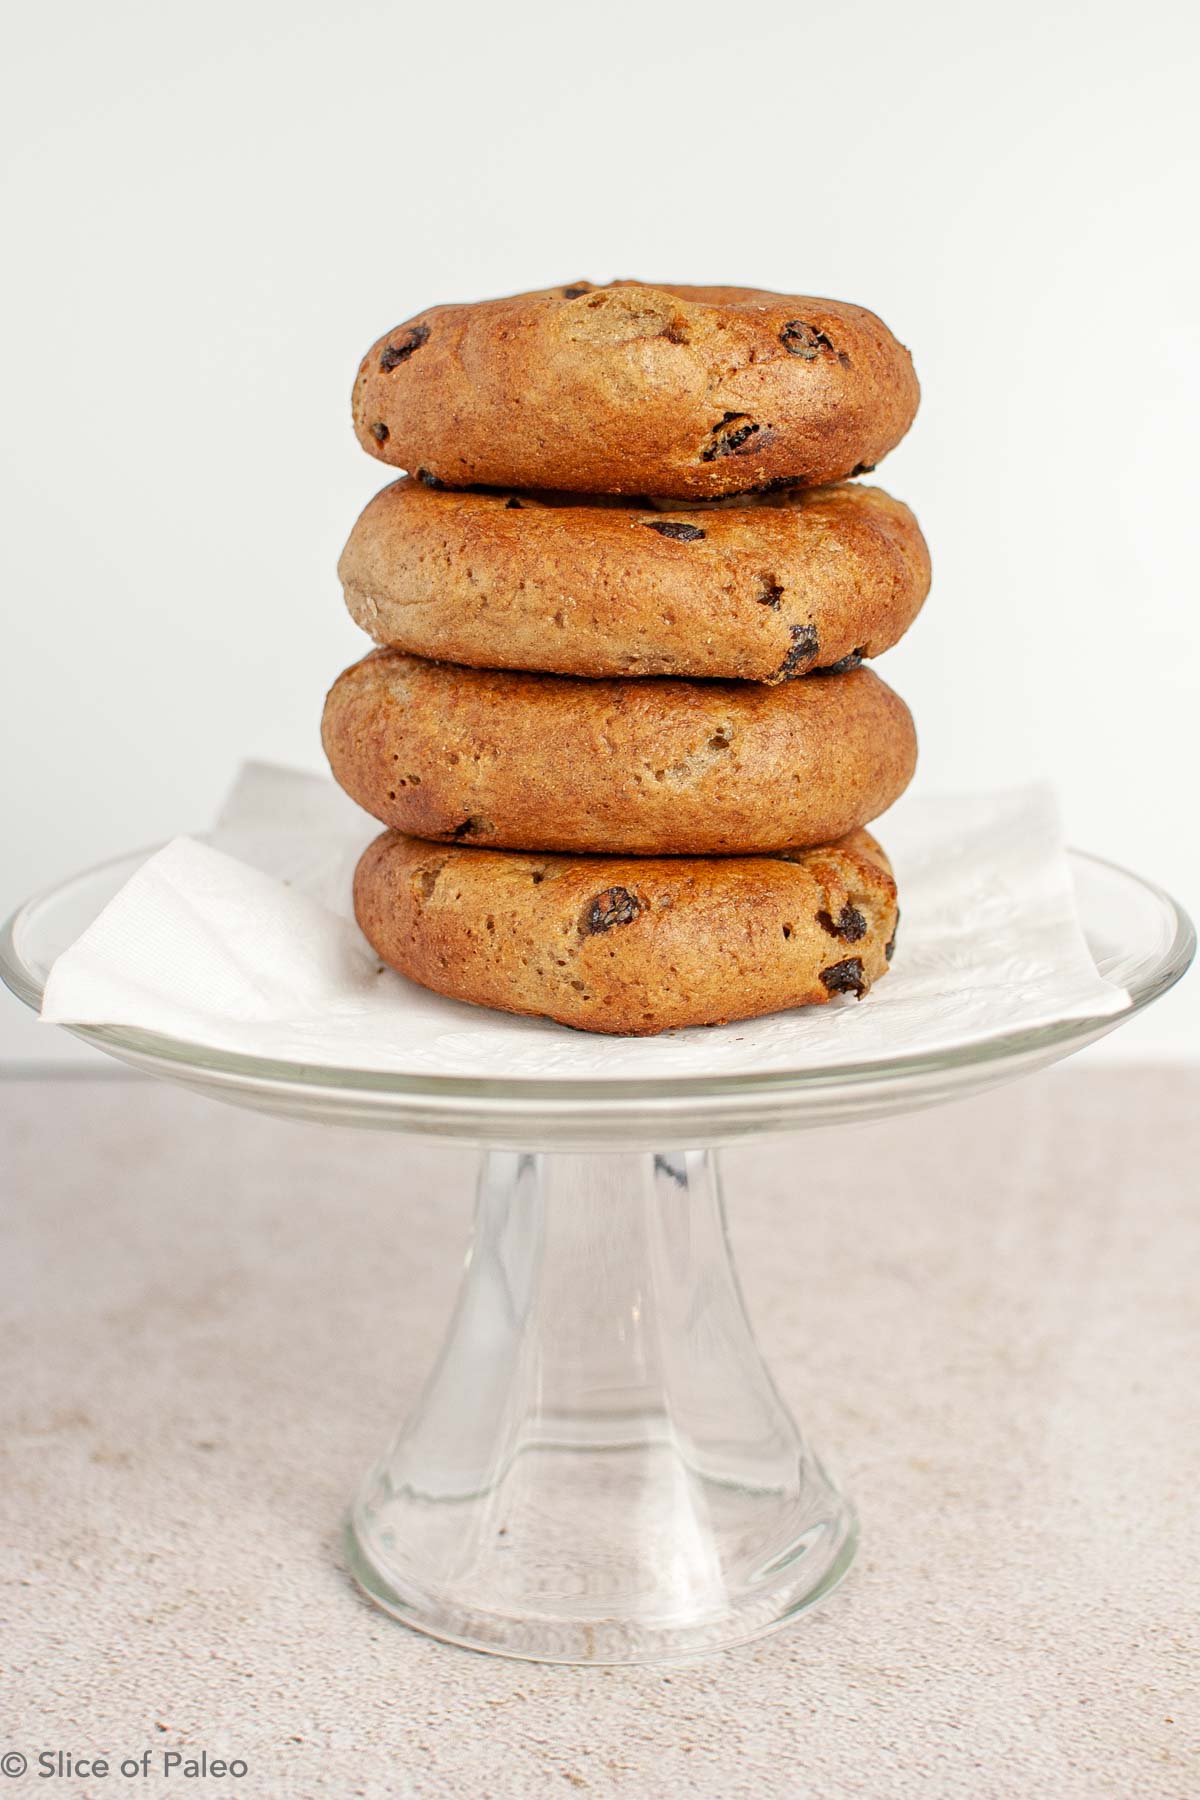 Paleo Cinnamon Raisin Bagels stacked on a cake stand